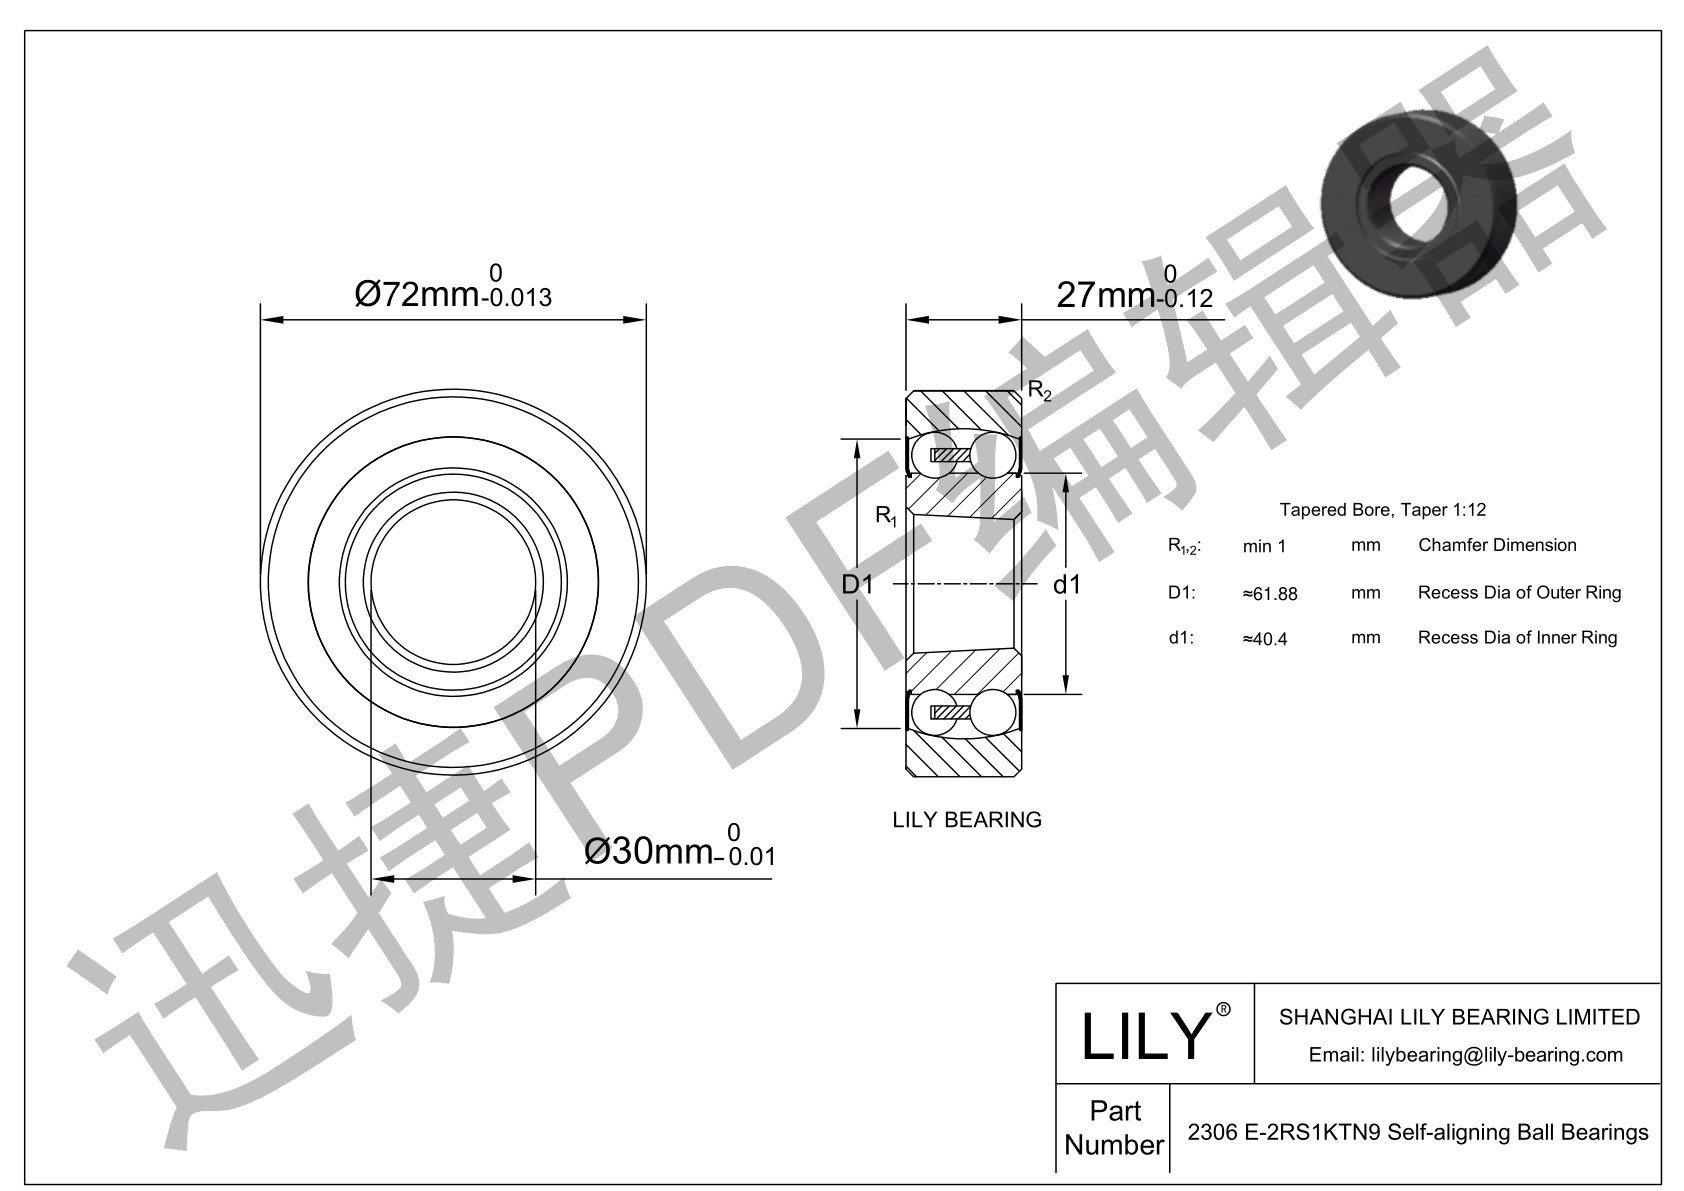 S2306 E-2RS1KTN9 Stainless Steel Self Aligning Ball Bearings cad drawing